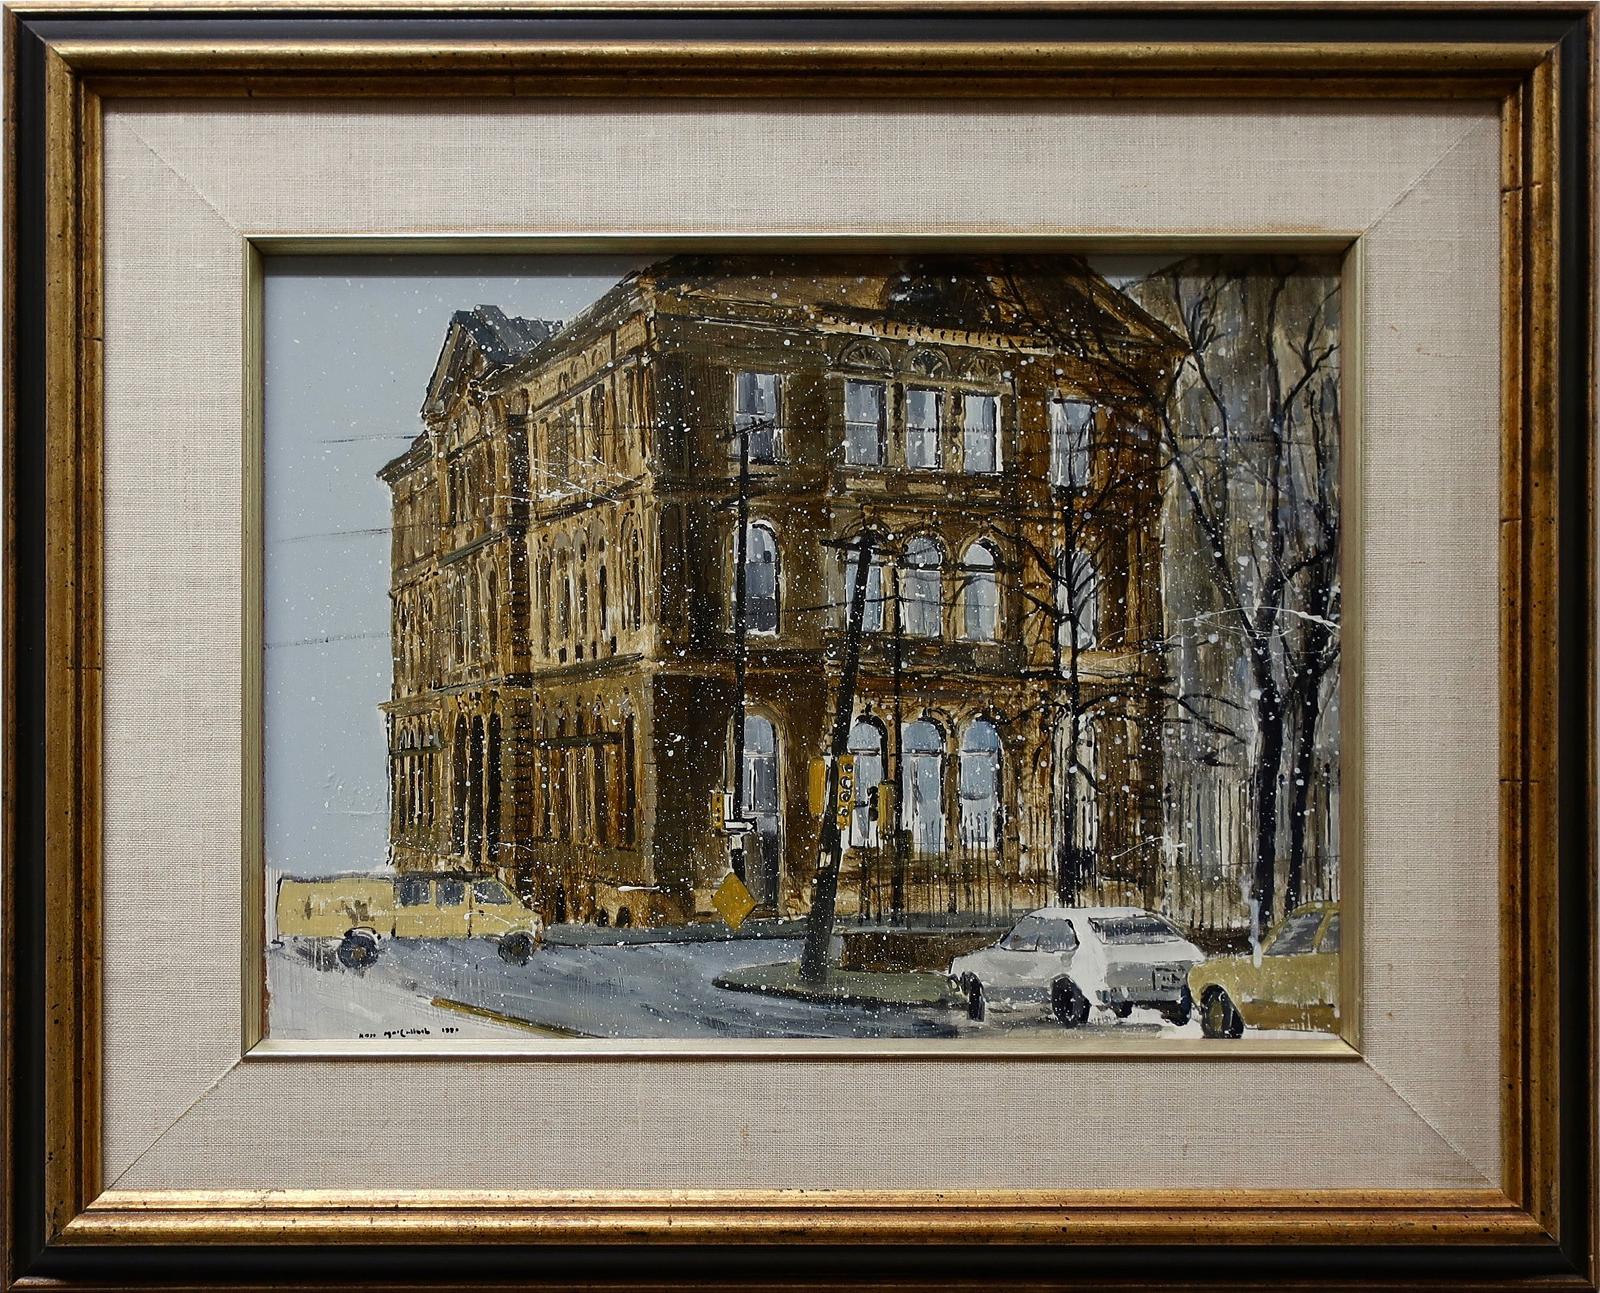 Ross E. Macculloch (1950-1993) - The Old Post Office (Halifax)